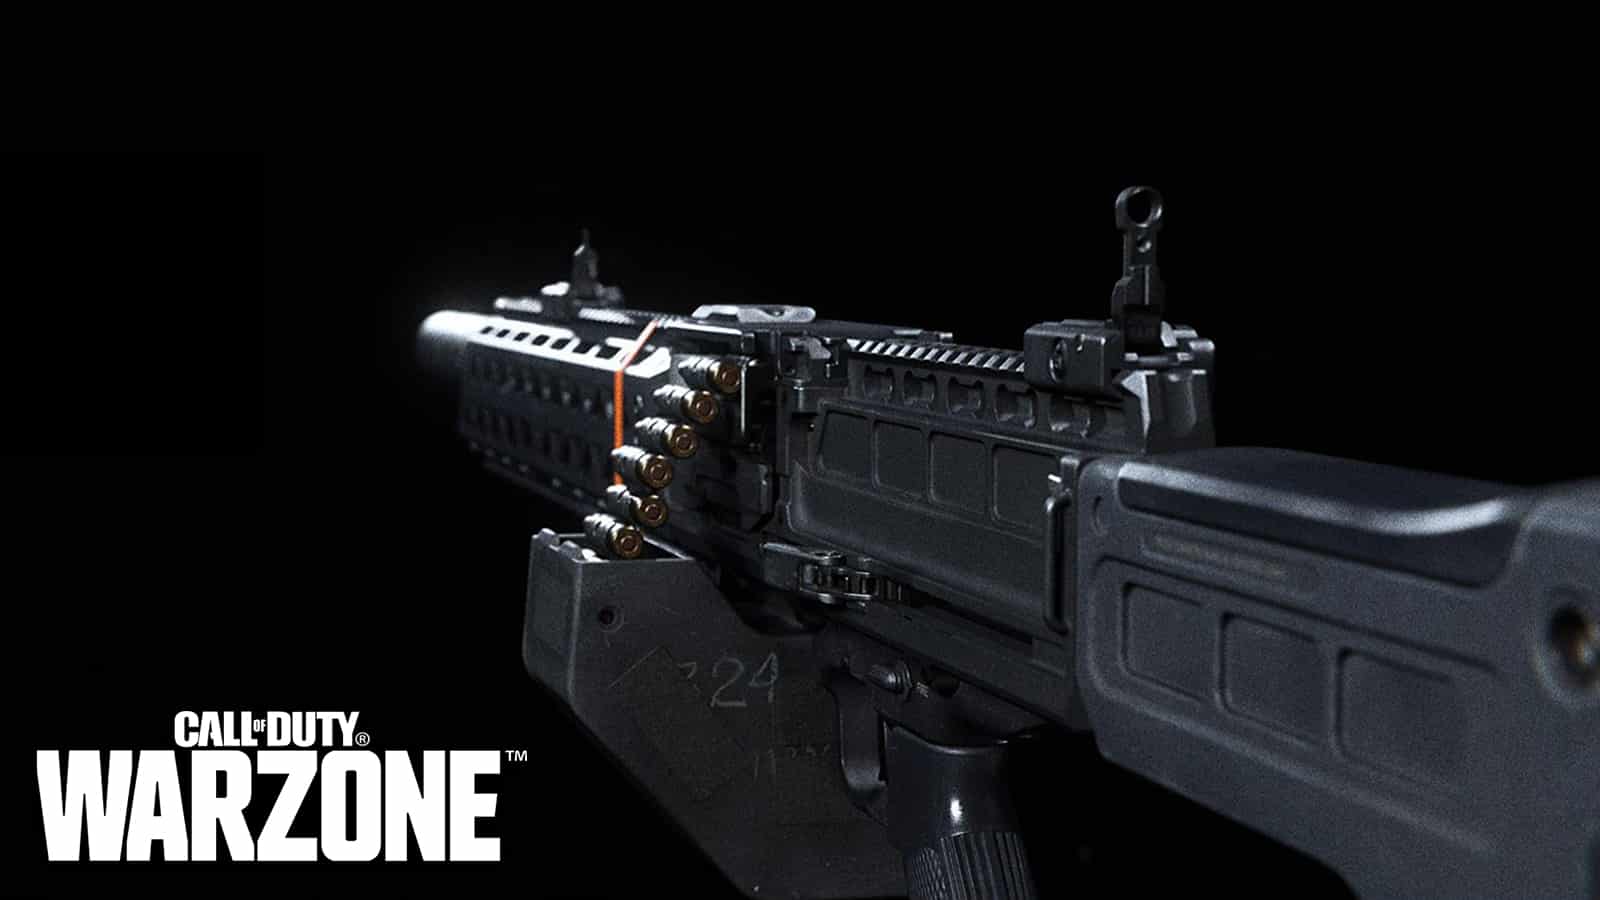 An image of the FiNN Chainsaw LMG in Warzone